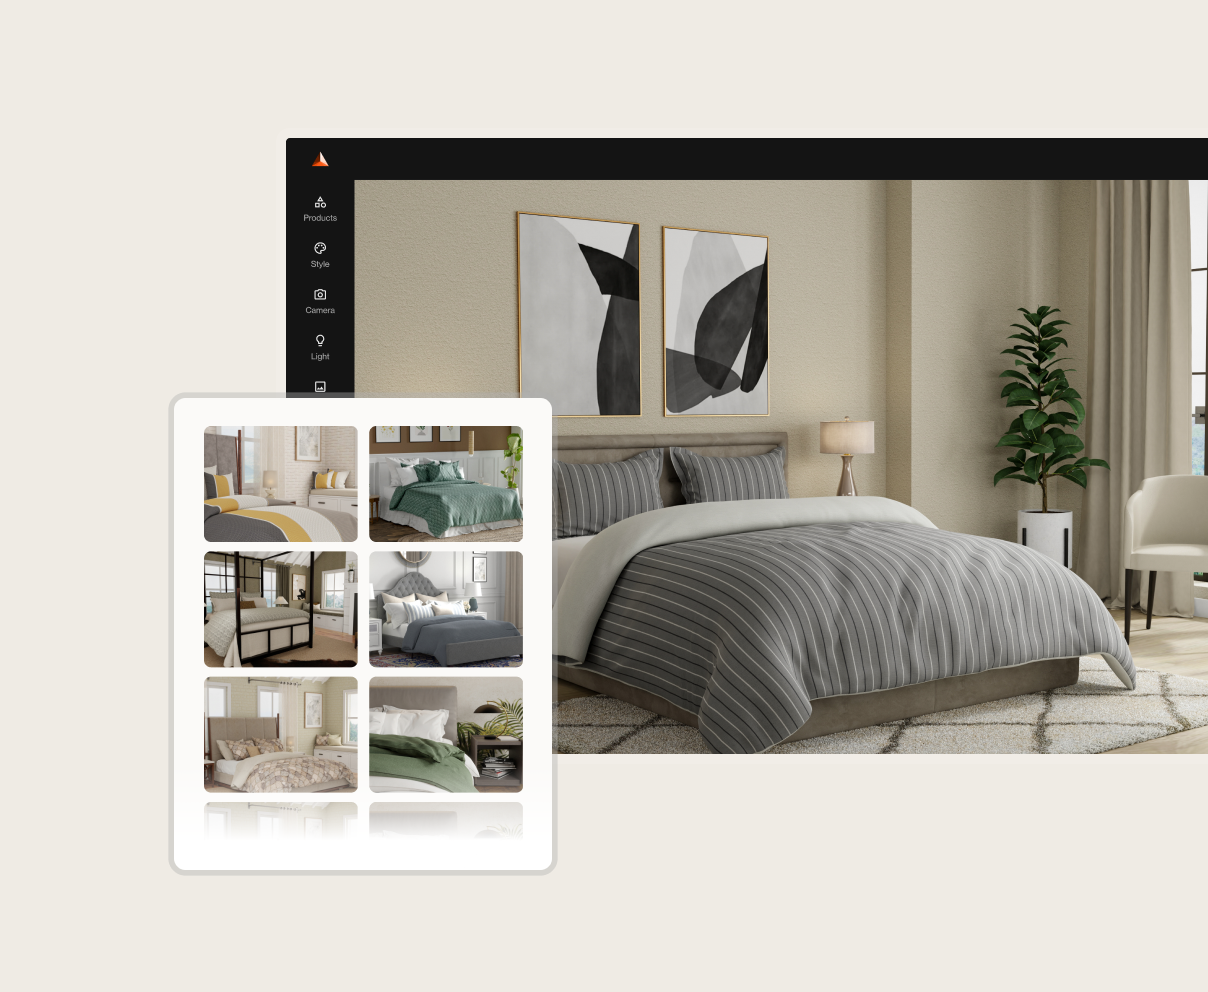 bedroom template in the application and a collection of additional bedroom templates to select from in imagine.io